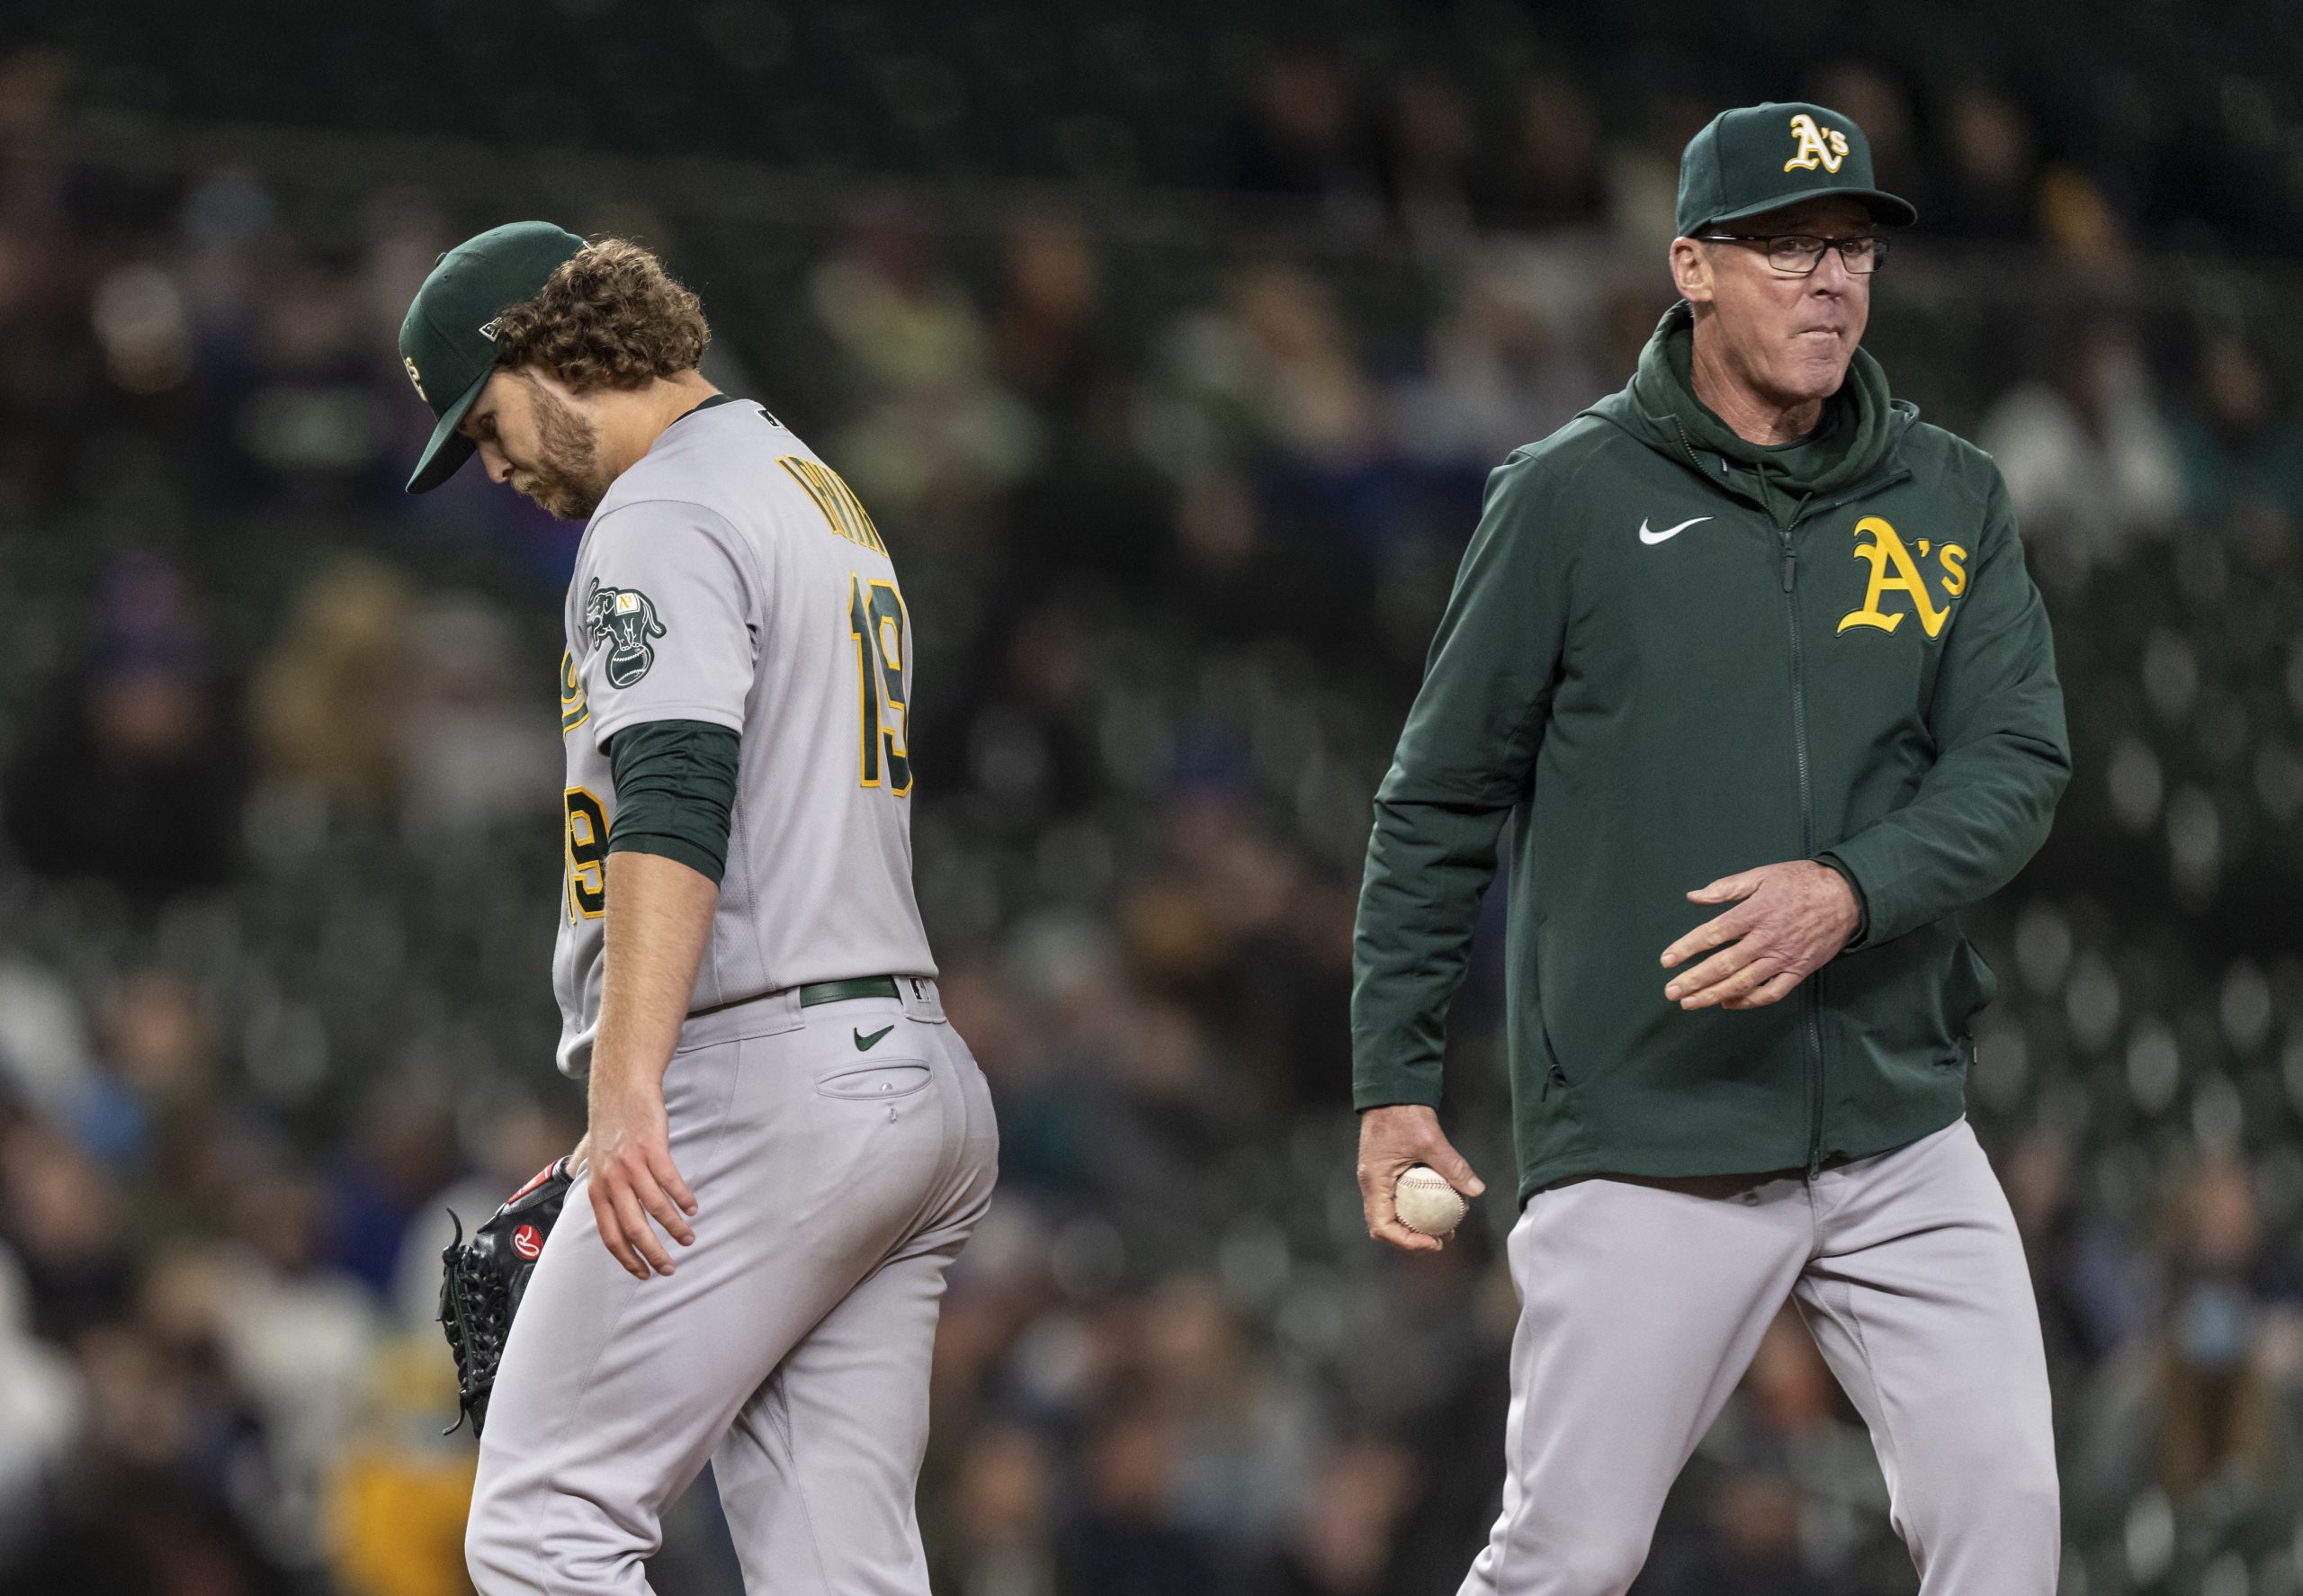 The A's Are About to Blow It Up - Baseball ProspectusBaseball Prospectus